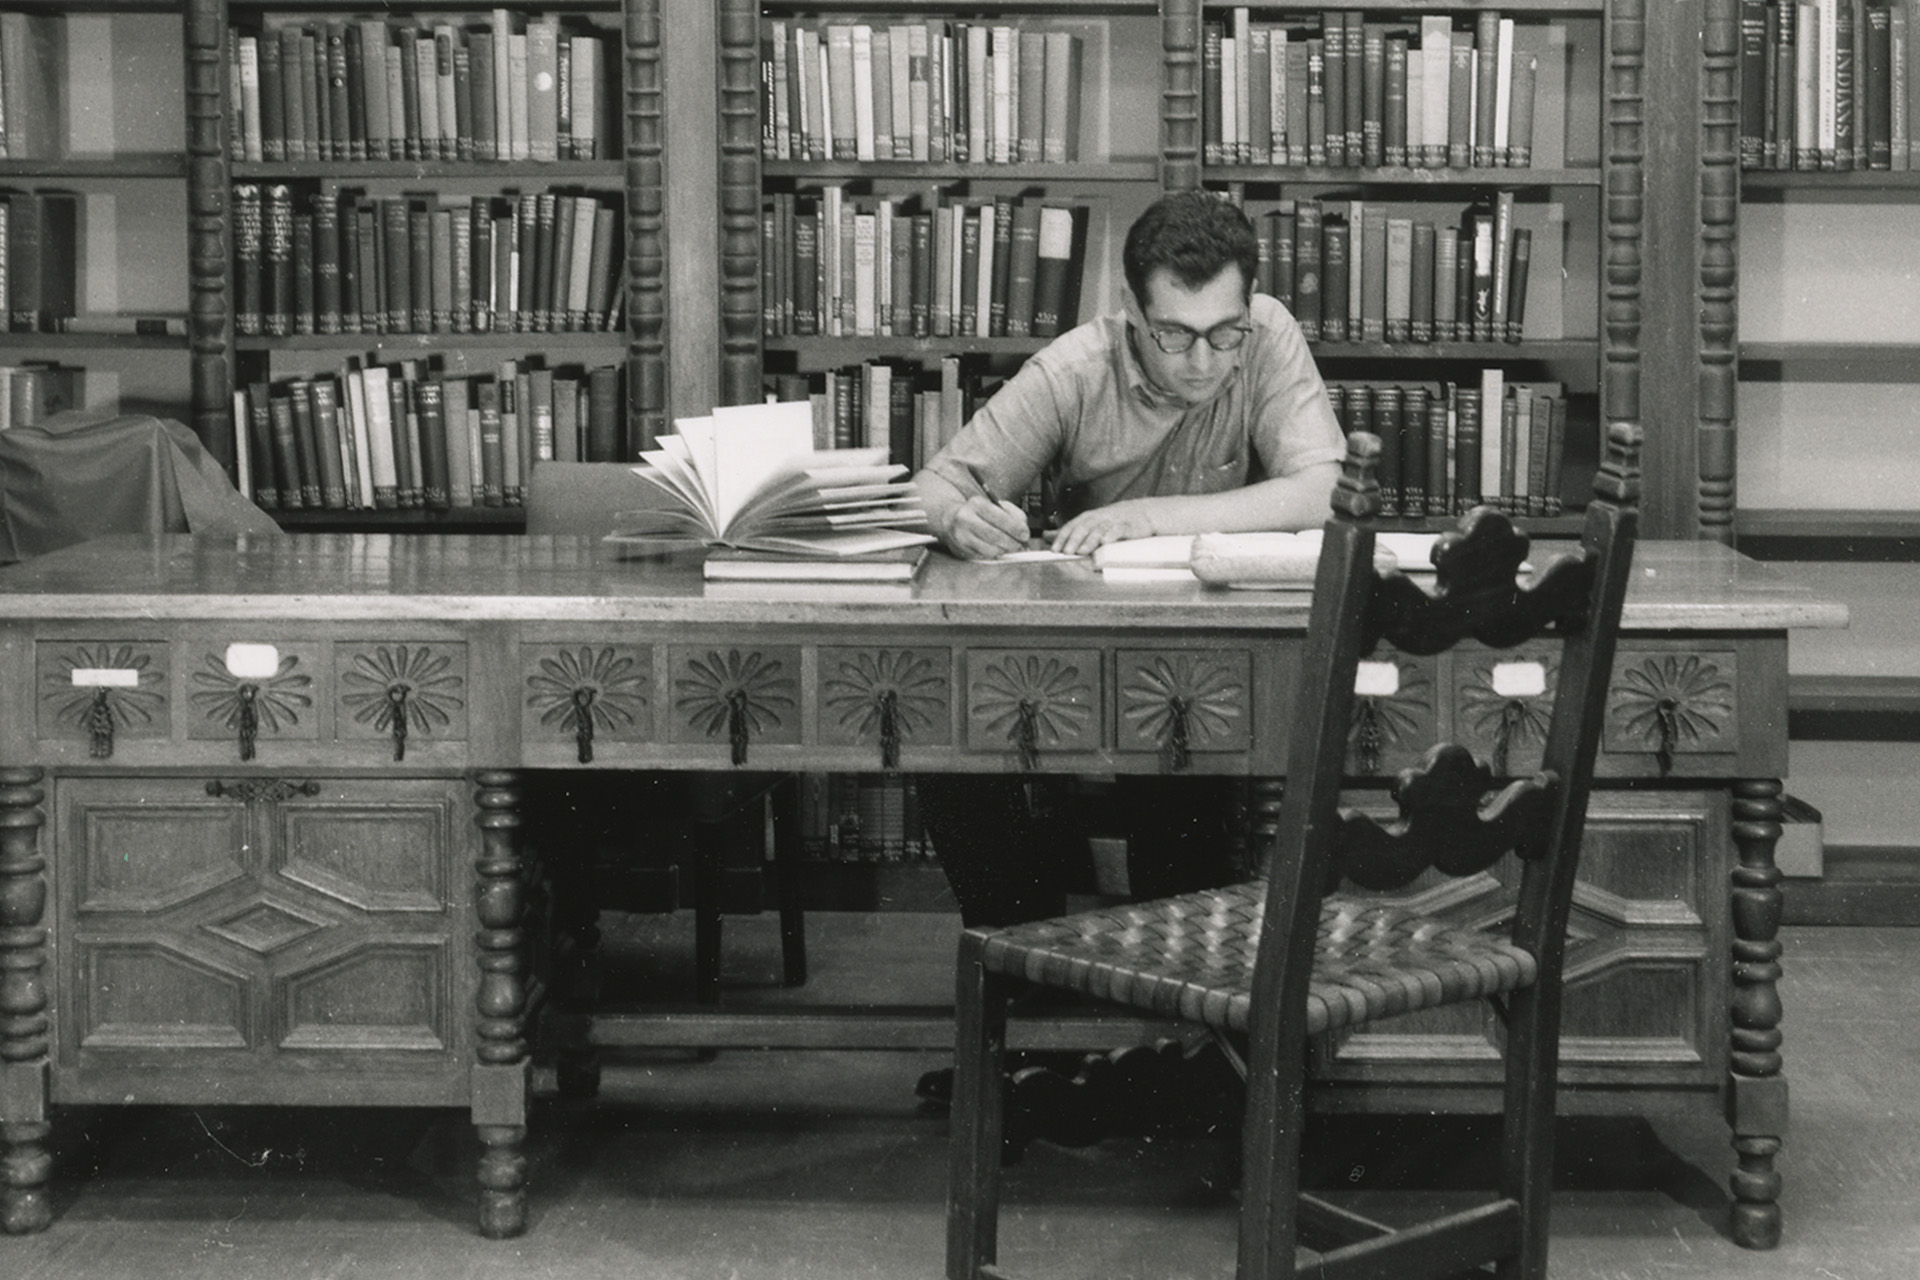 A black and white photo of a man wearing glasses sitting at a desk in a library.